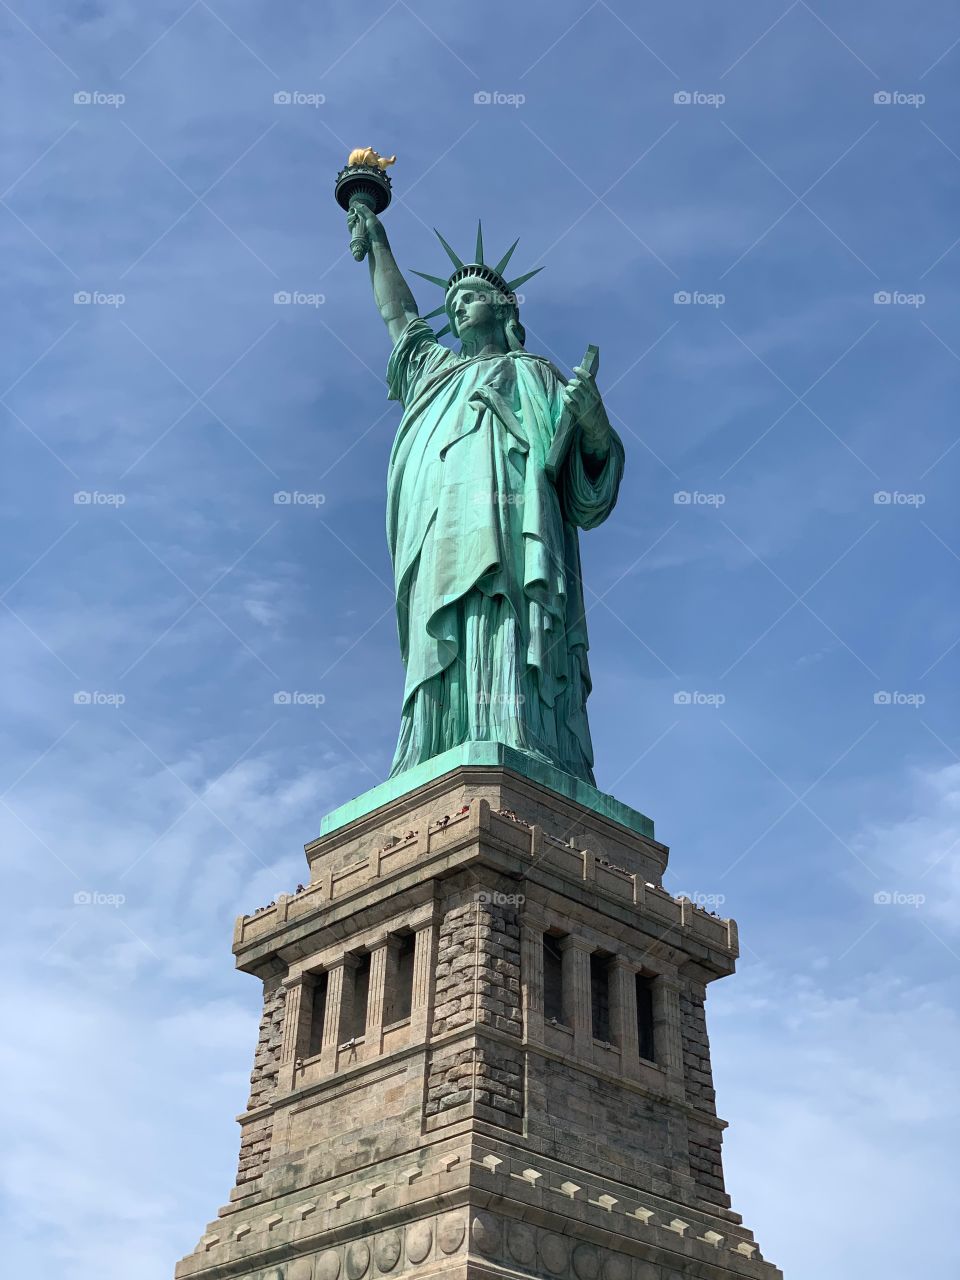 The Statue of Liberty, New York city, United States of America